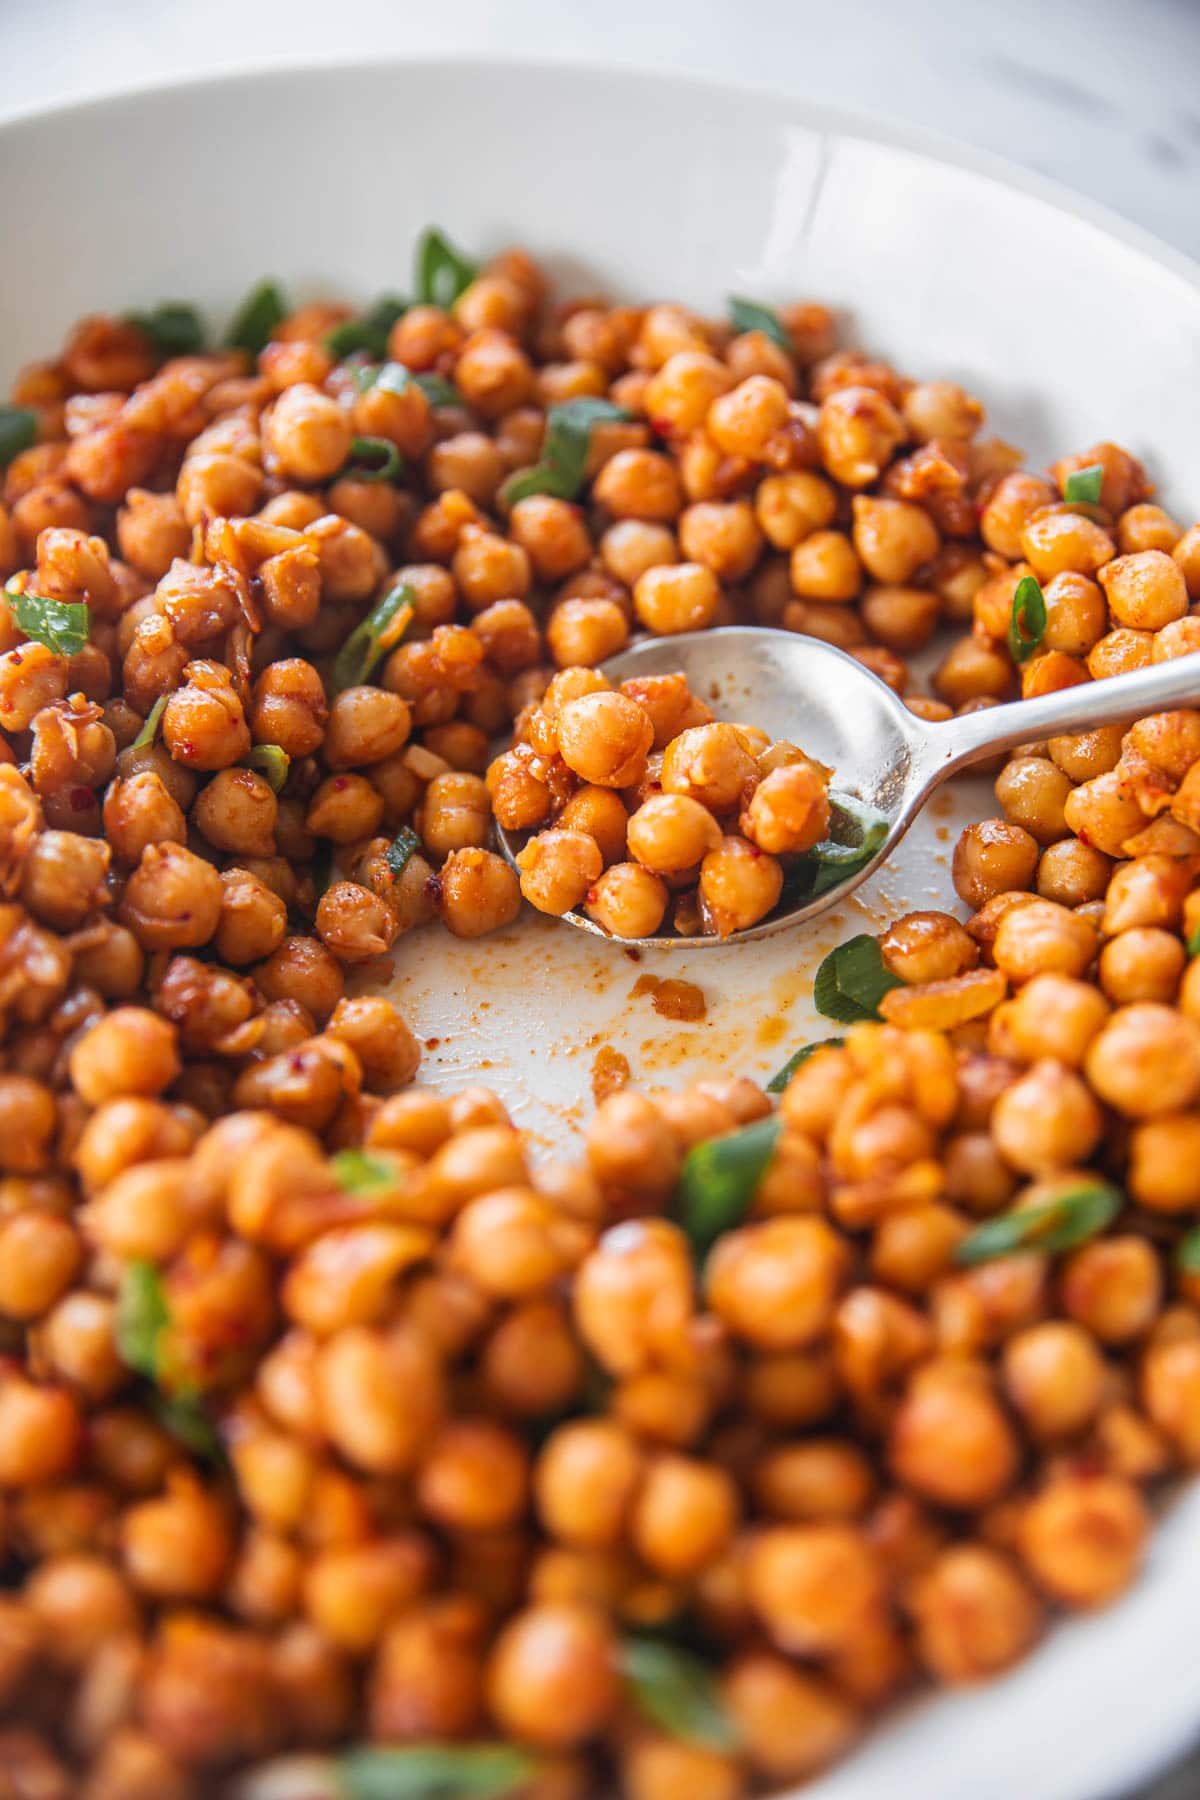 Sauteed Spicy Chickpeas scooped with a sppon.